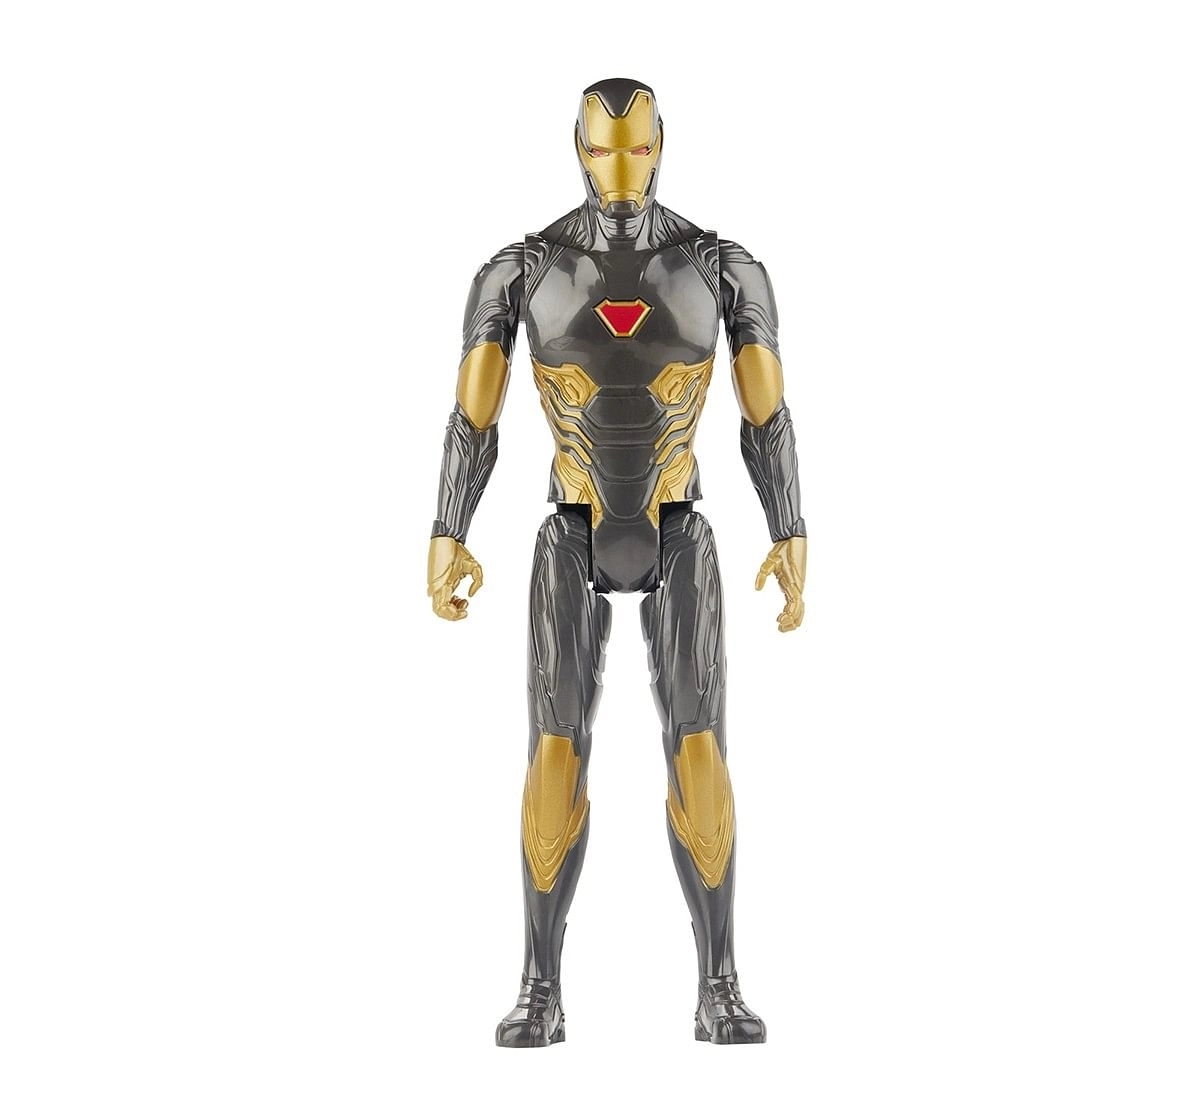 Marvel Avengers Titan Hero Series Blast Gear Iron Man Action Figure, 12-Inch Toy, for age 4Y+ 